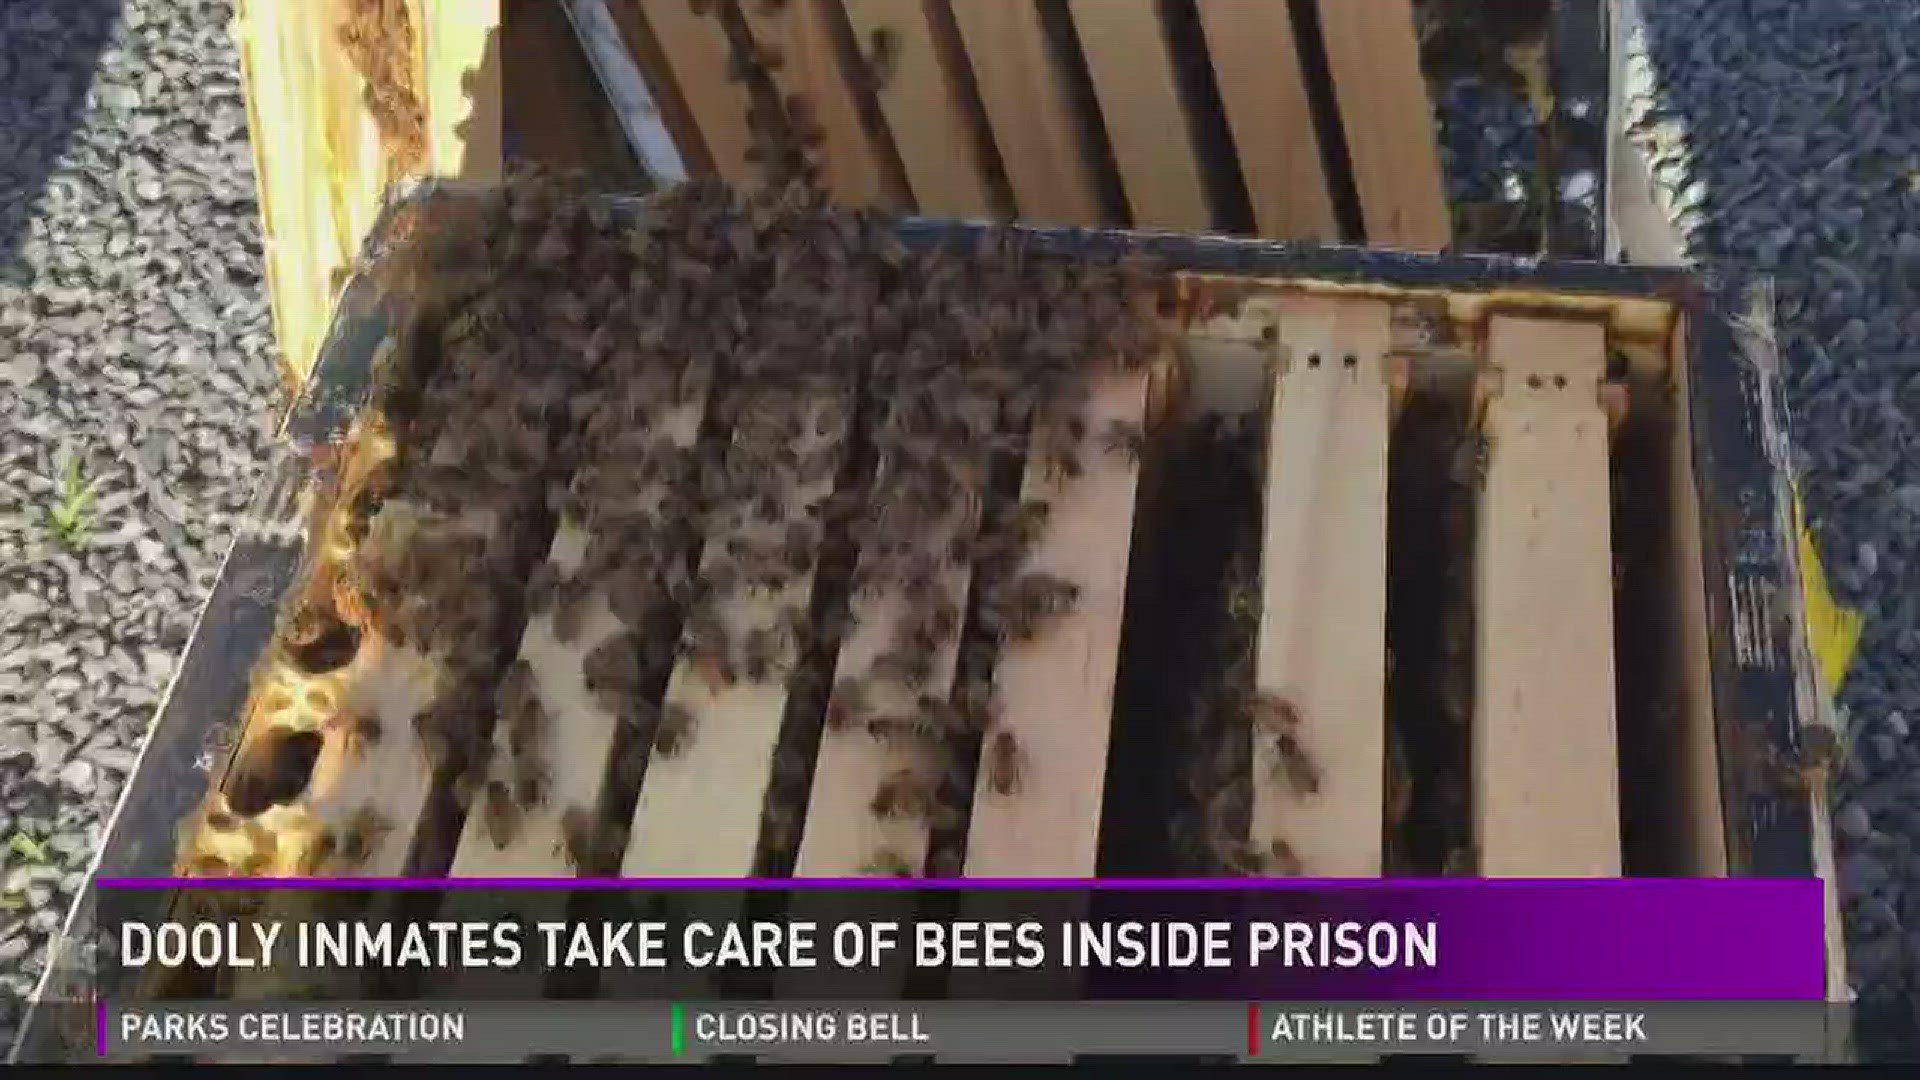 Dooly inmates take care of bees inside prison